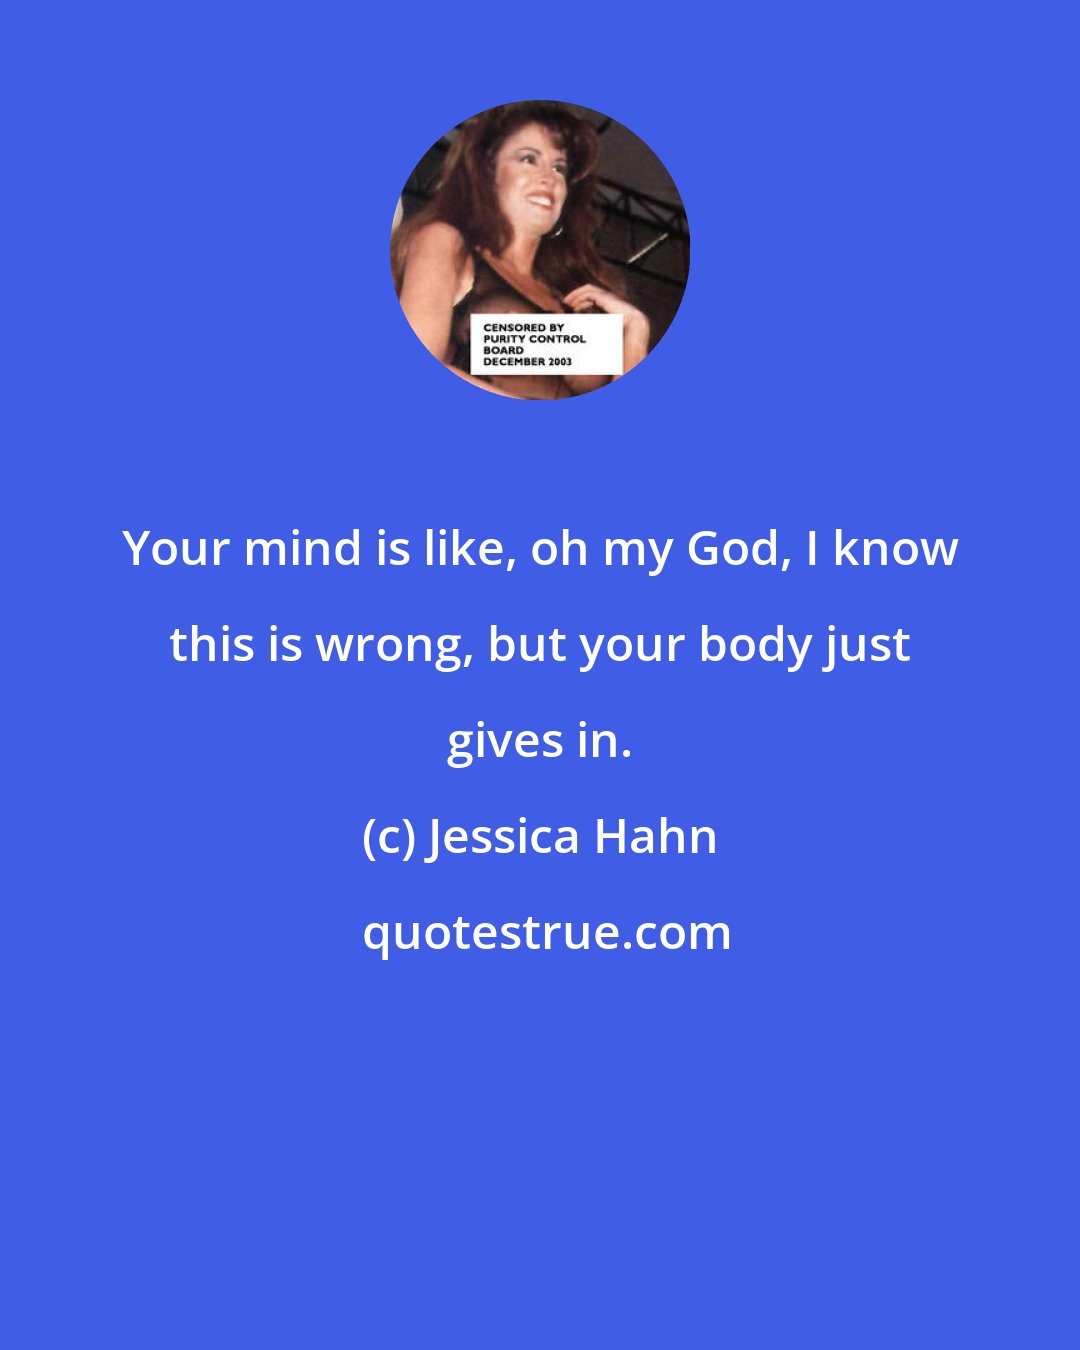 Jessica Hahn: Your mind is like, oh my God, I know this is wrong, but your body just gives in.